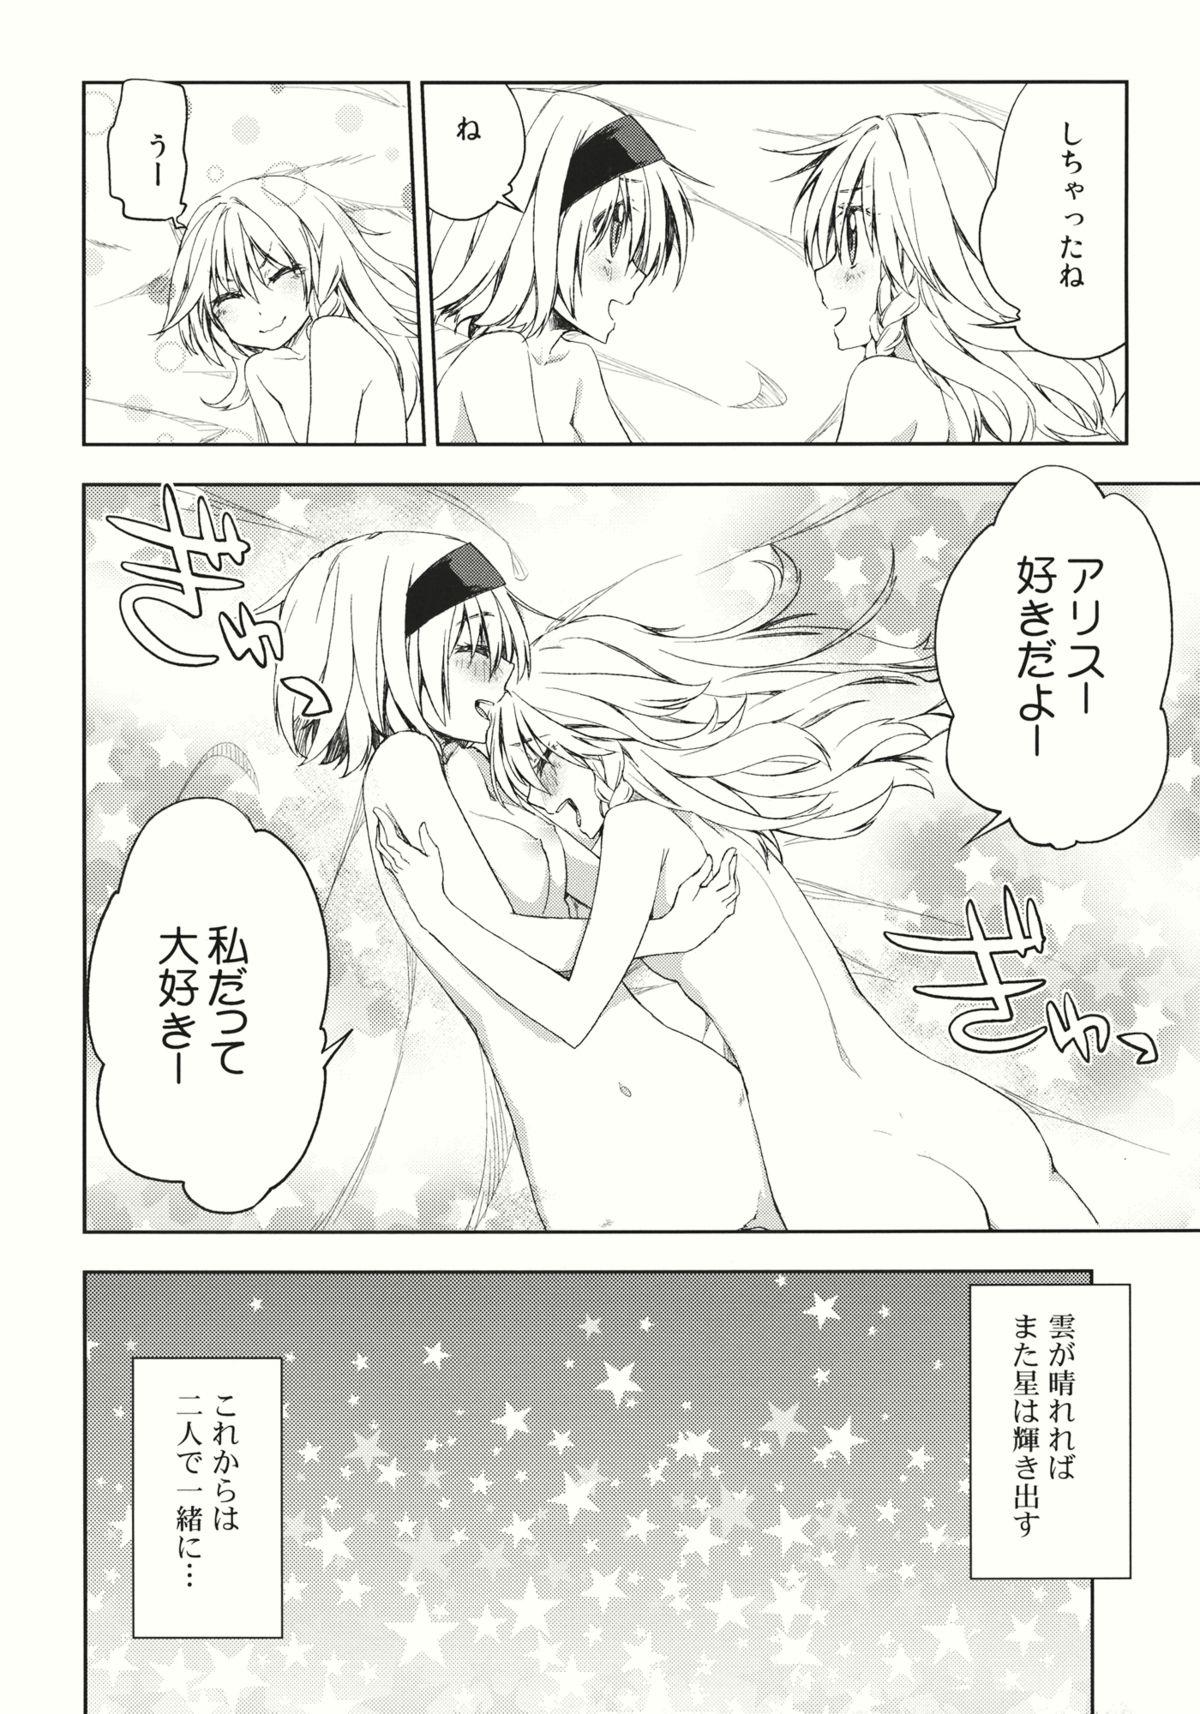 Real Sex twinkle star - Touhou project Spank - Page 24